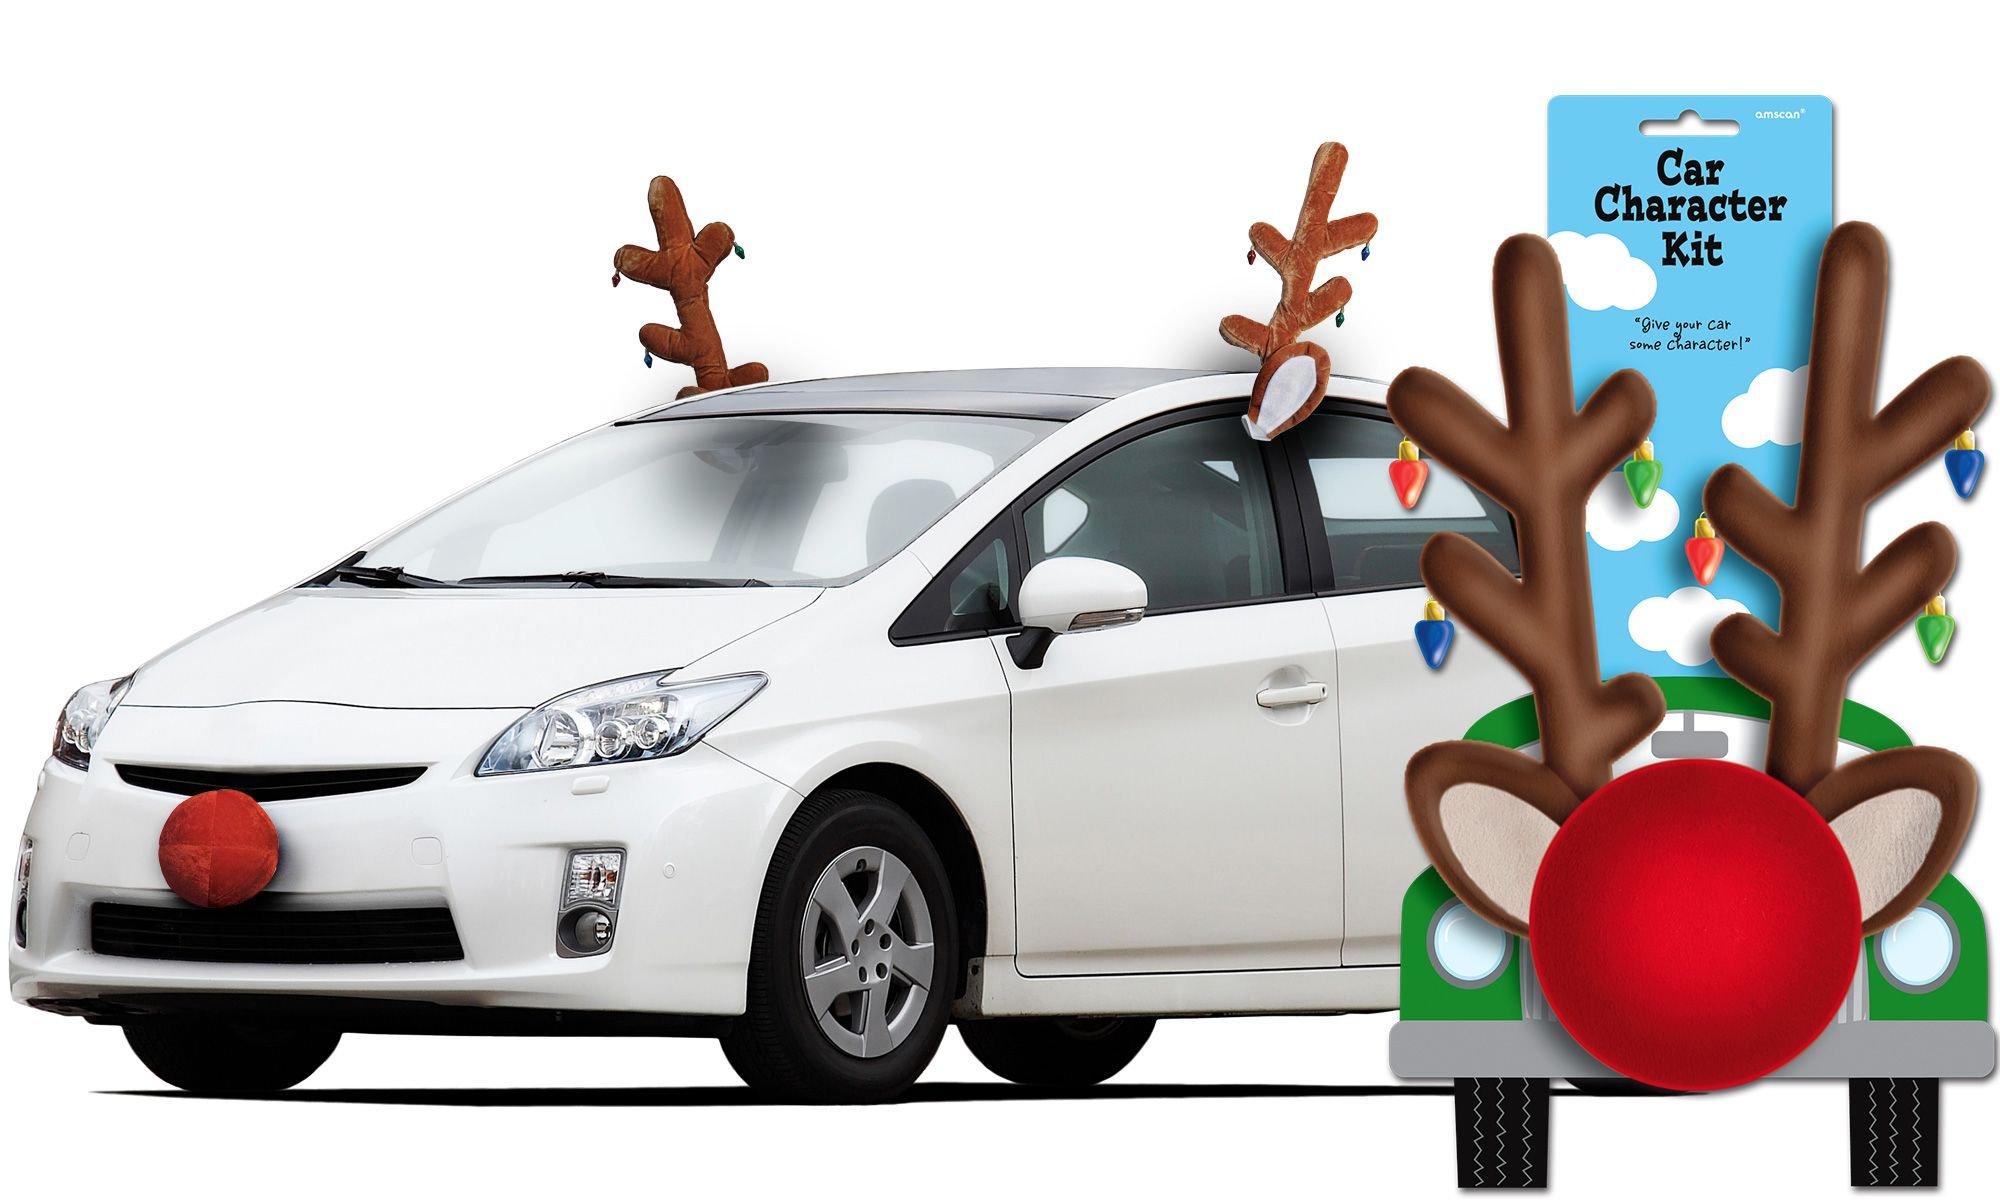 Aohcae Christmas Car Reindeer Antlers & Nose for Cars Window Rudolph Reindeer Car Kit with Jingle Bell Christmas Car Antlers Decoration Christmas